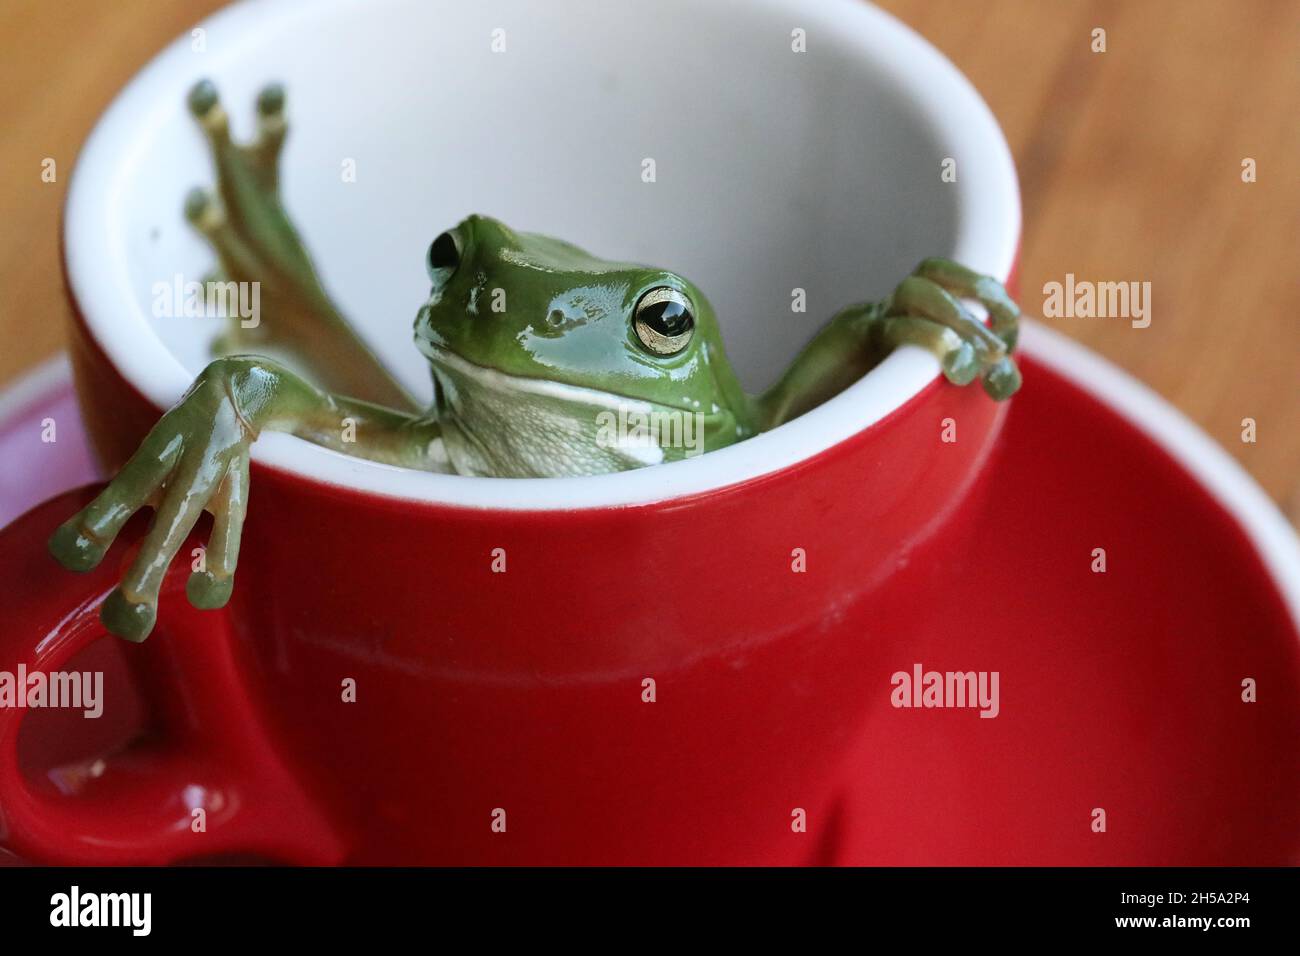 A beautiful big Australian green tree frog relaxing in a bright red tulip style coffee or tea cup and saucer. Creative quirky and unusual animal Stock Photo